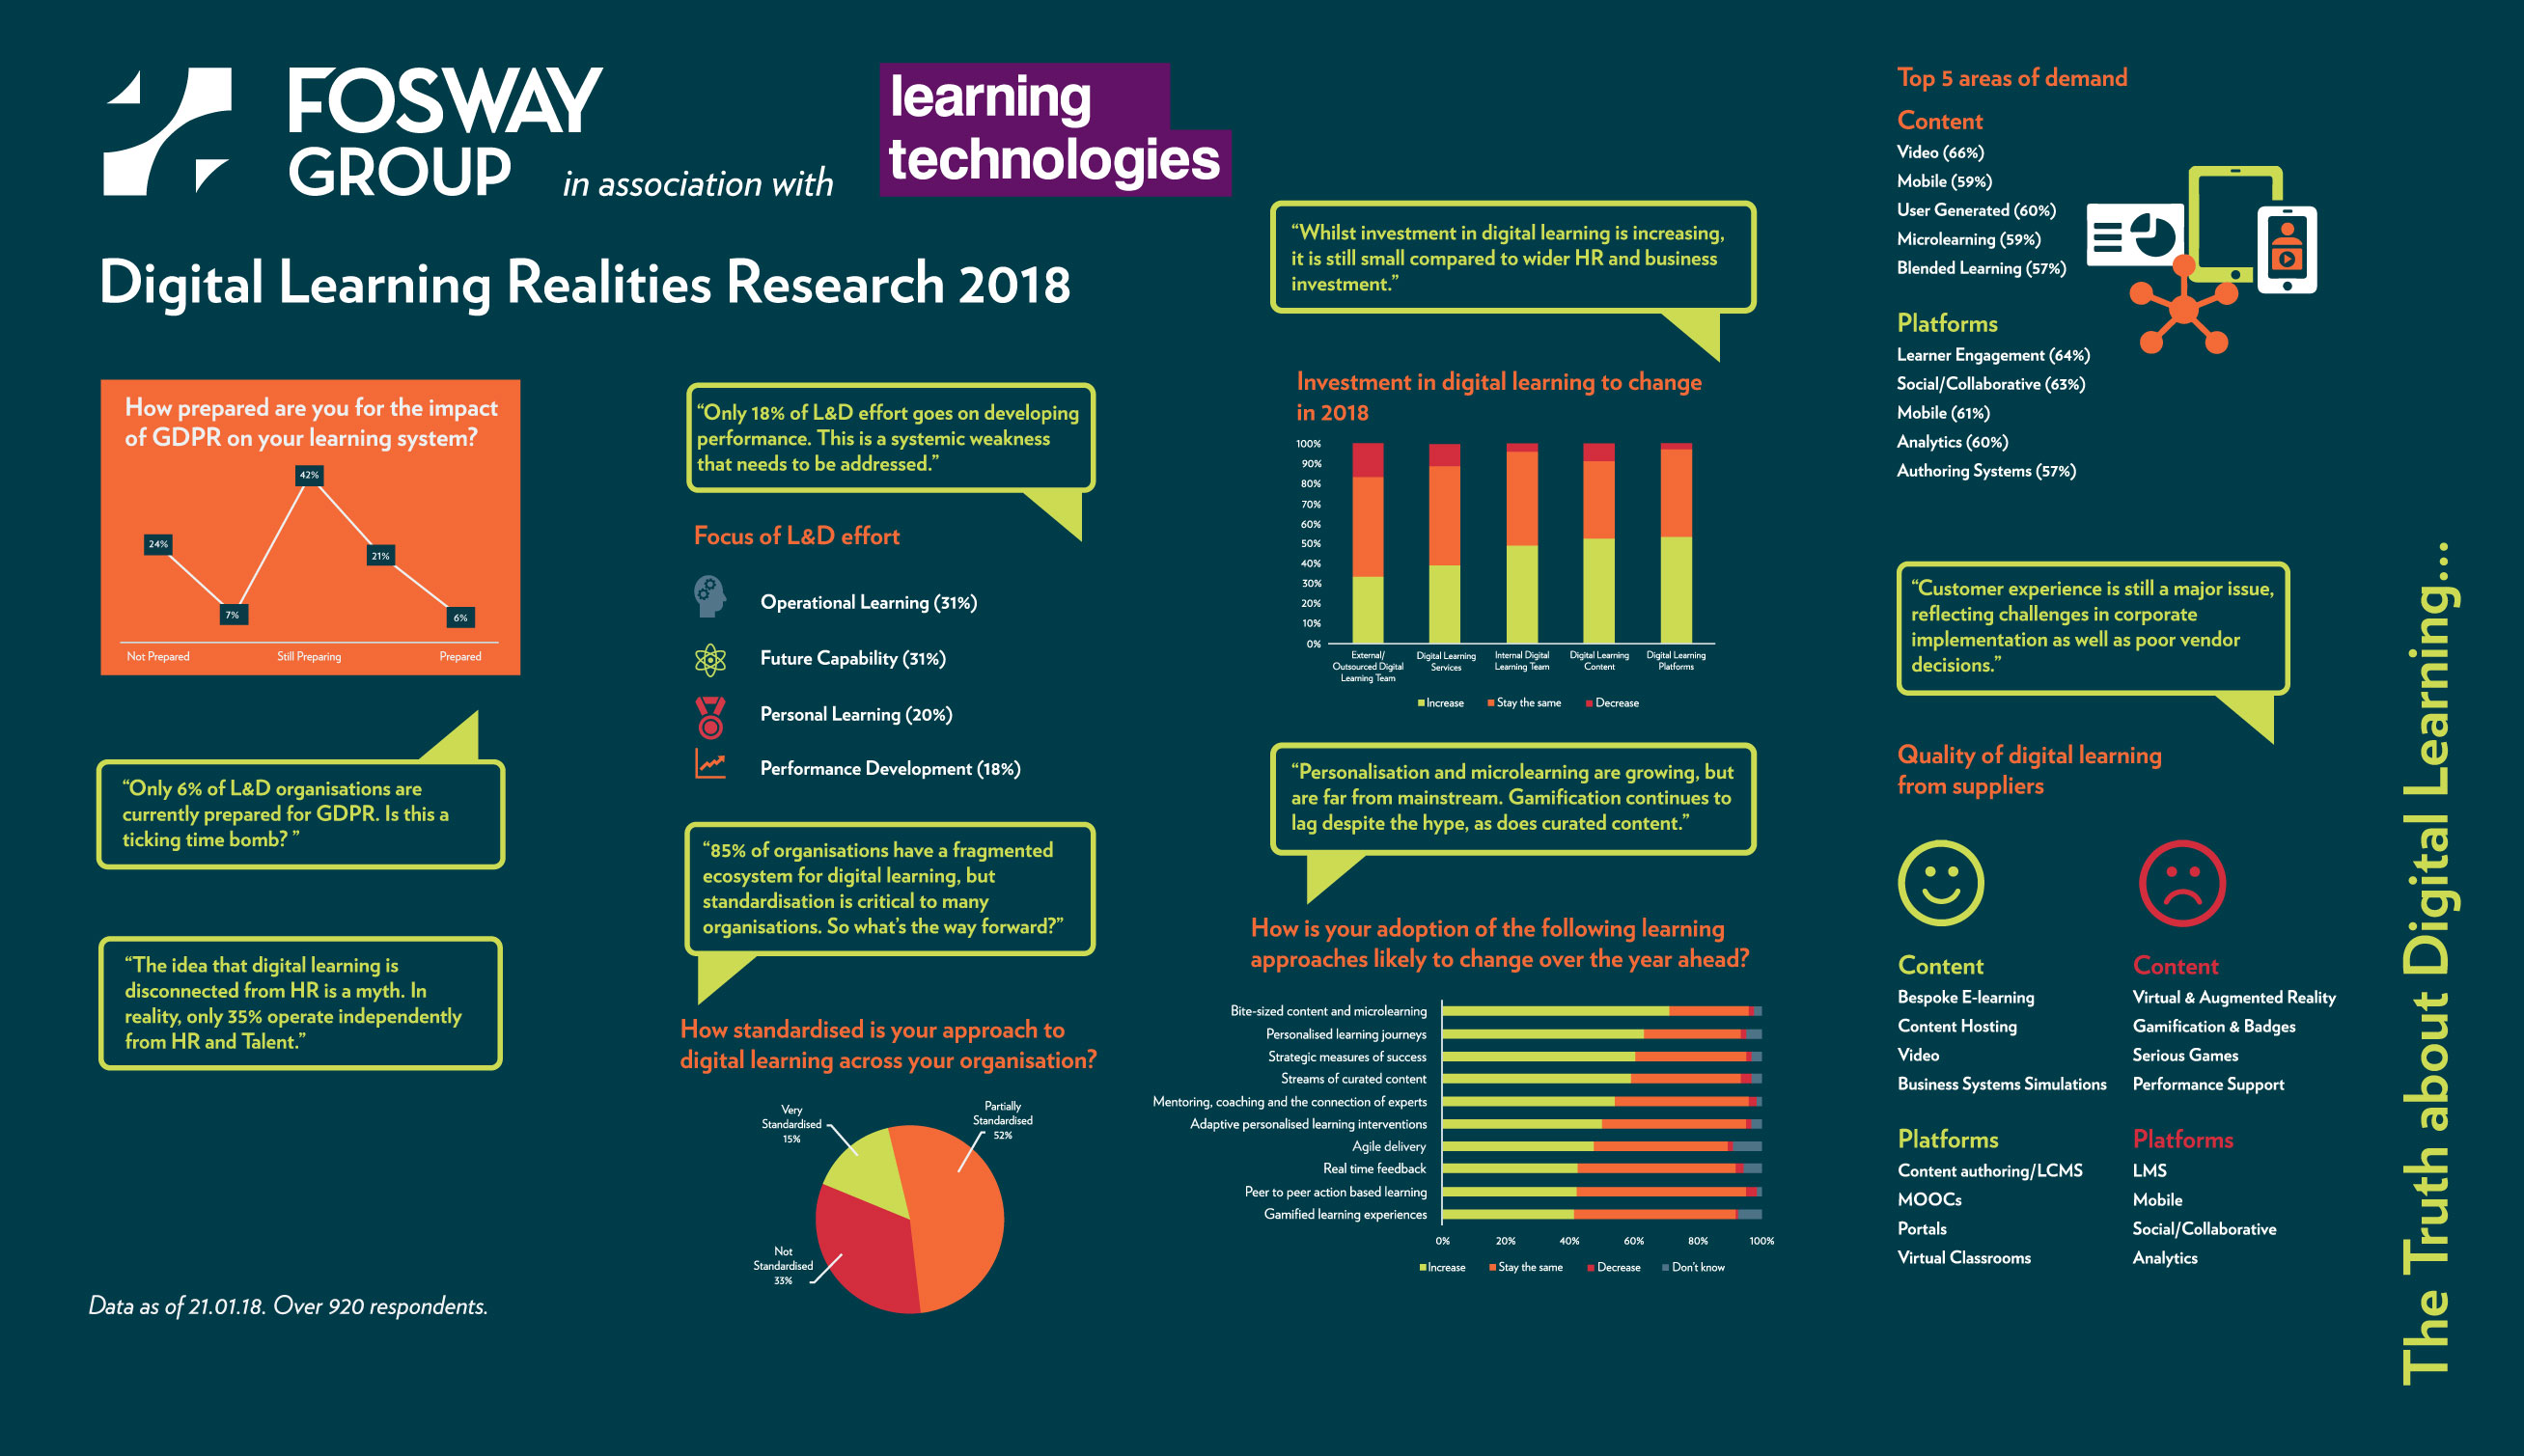 Fosway and Learning Technologies reveal the truth about digital learning in 2018